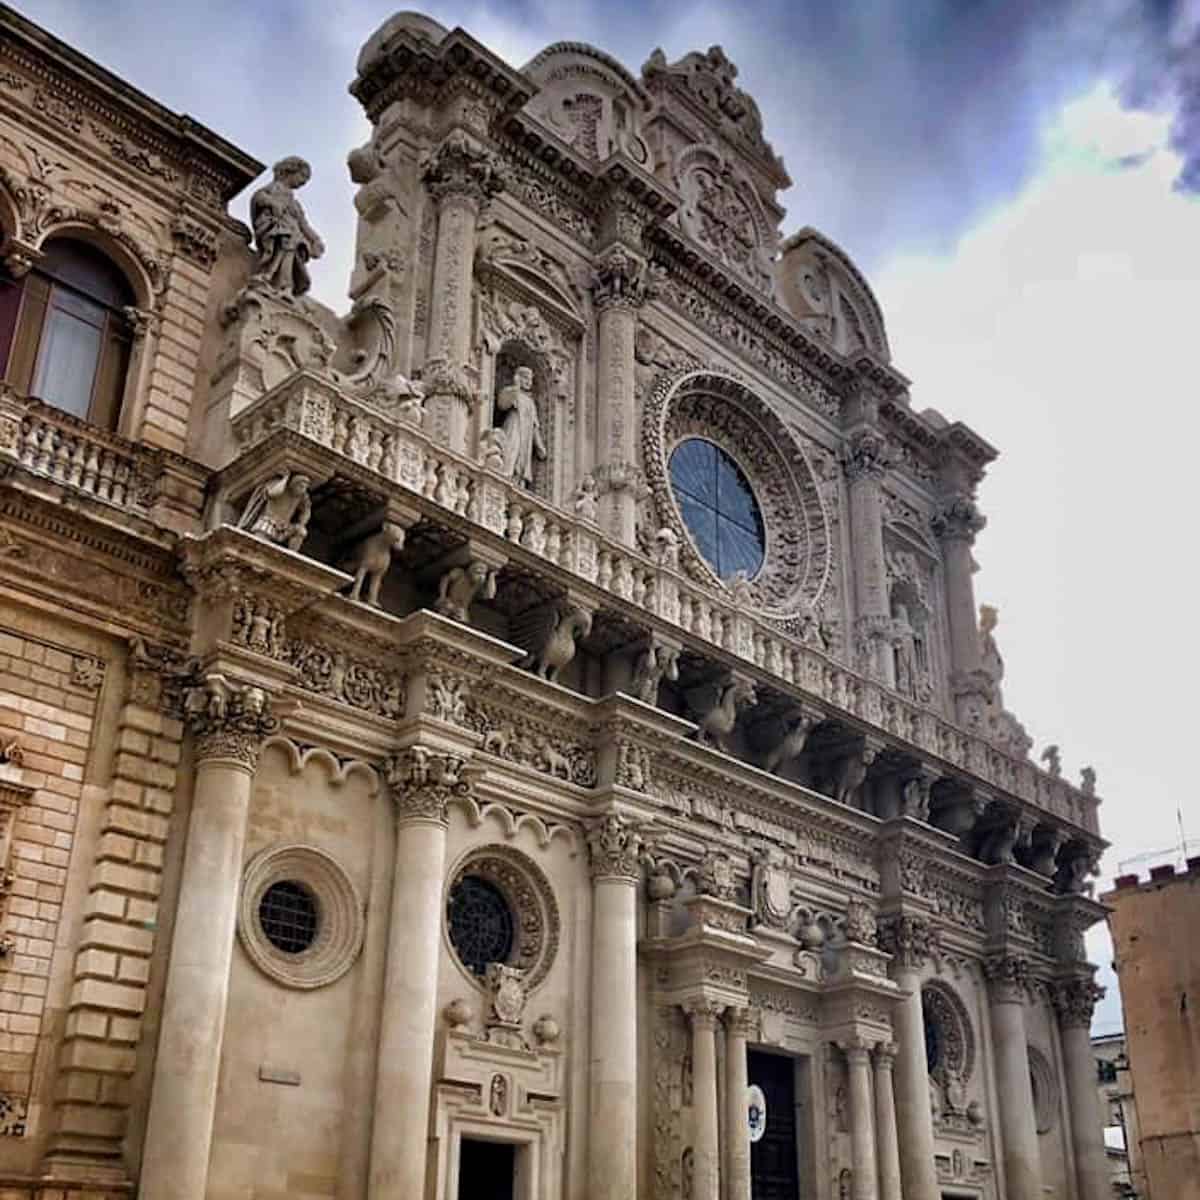 The intricately carved Baroque facade of Santa Croce Basilica in Lecce, Italy.